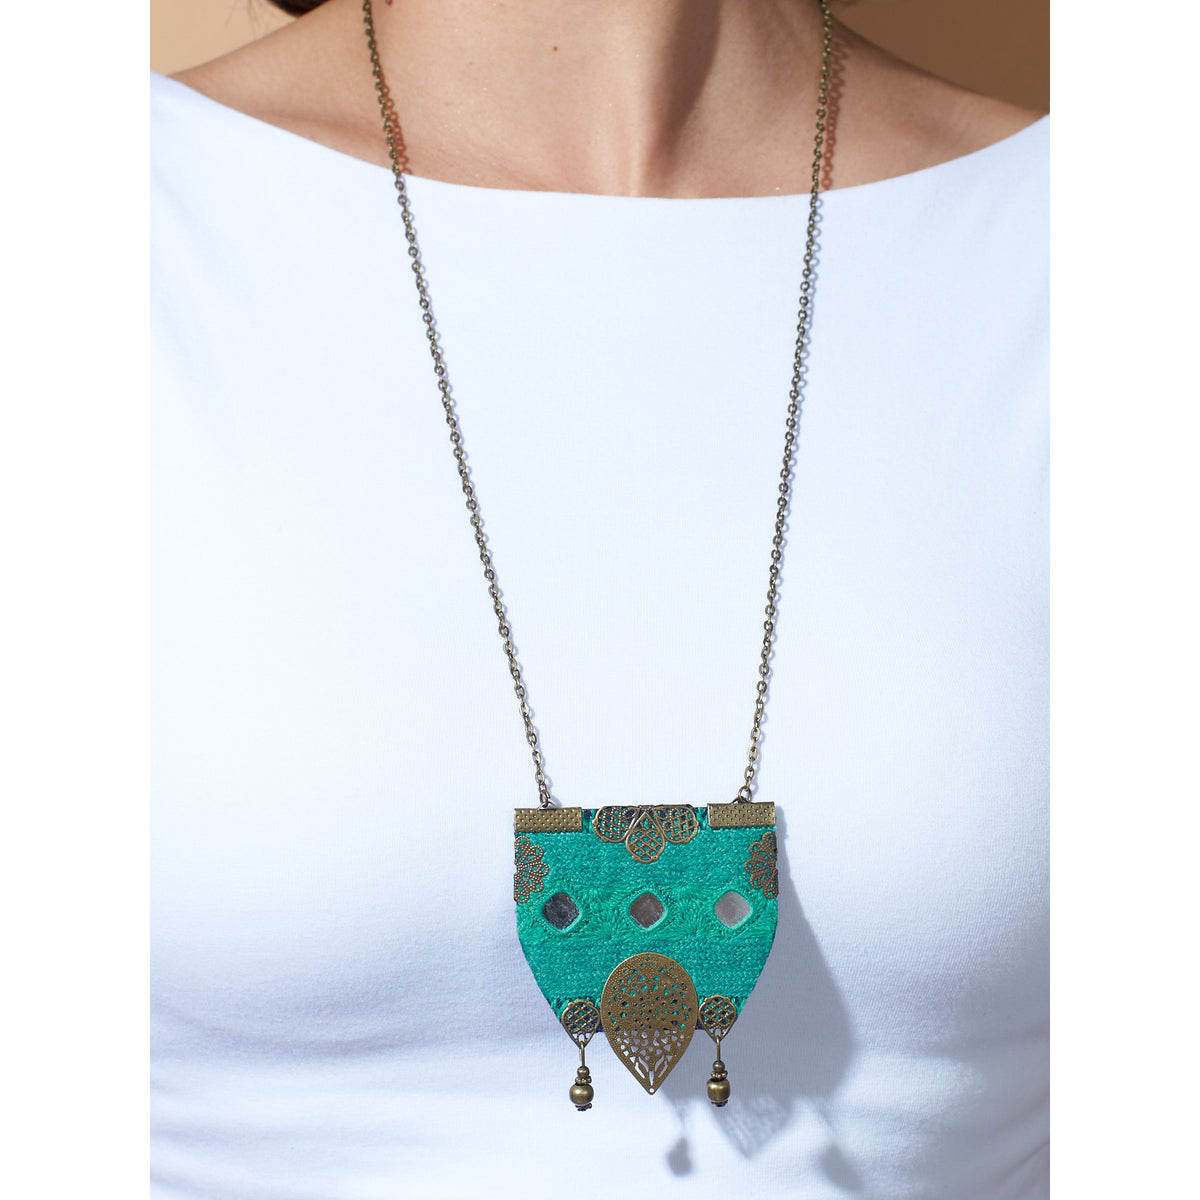 Boho Turquoise Statement Necklace Hand embroidery-MIM2629